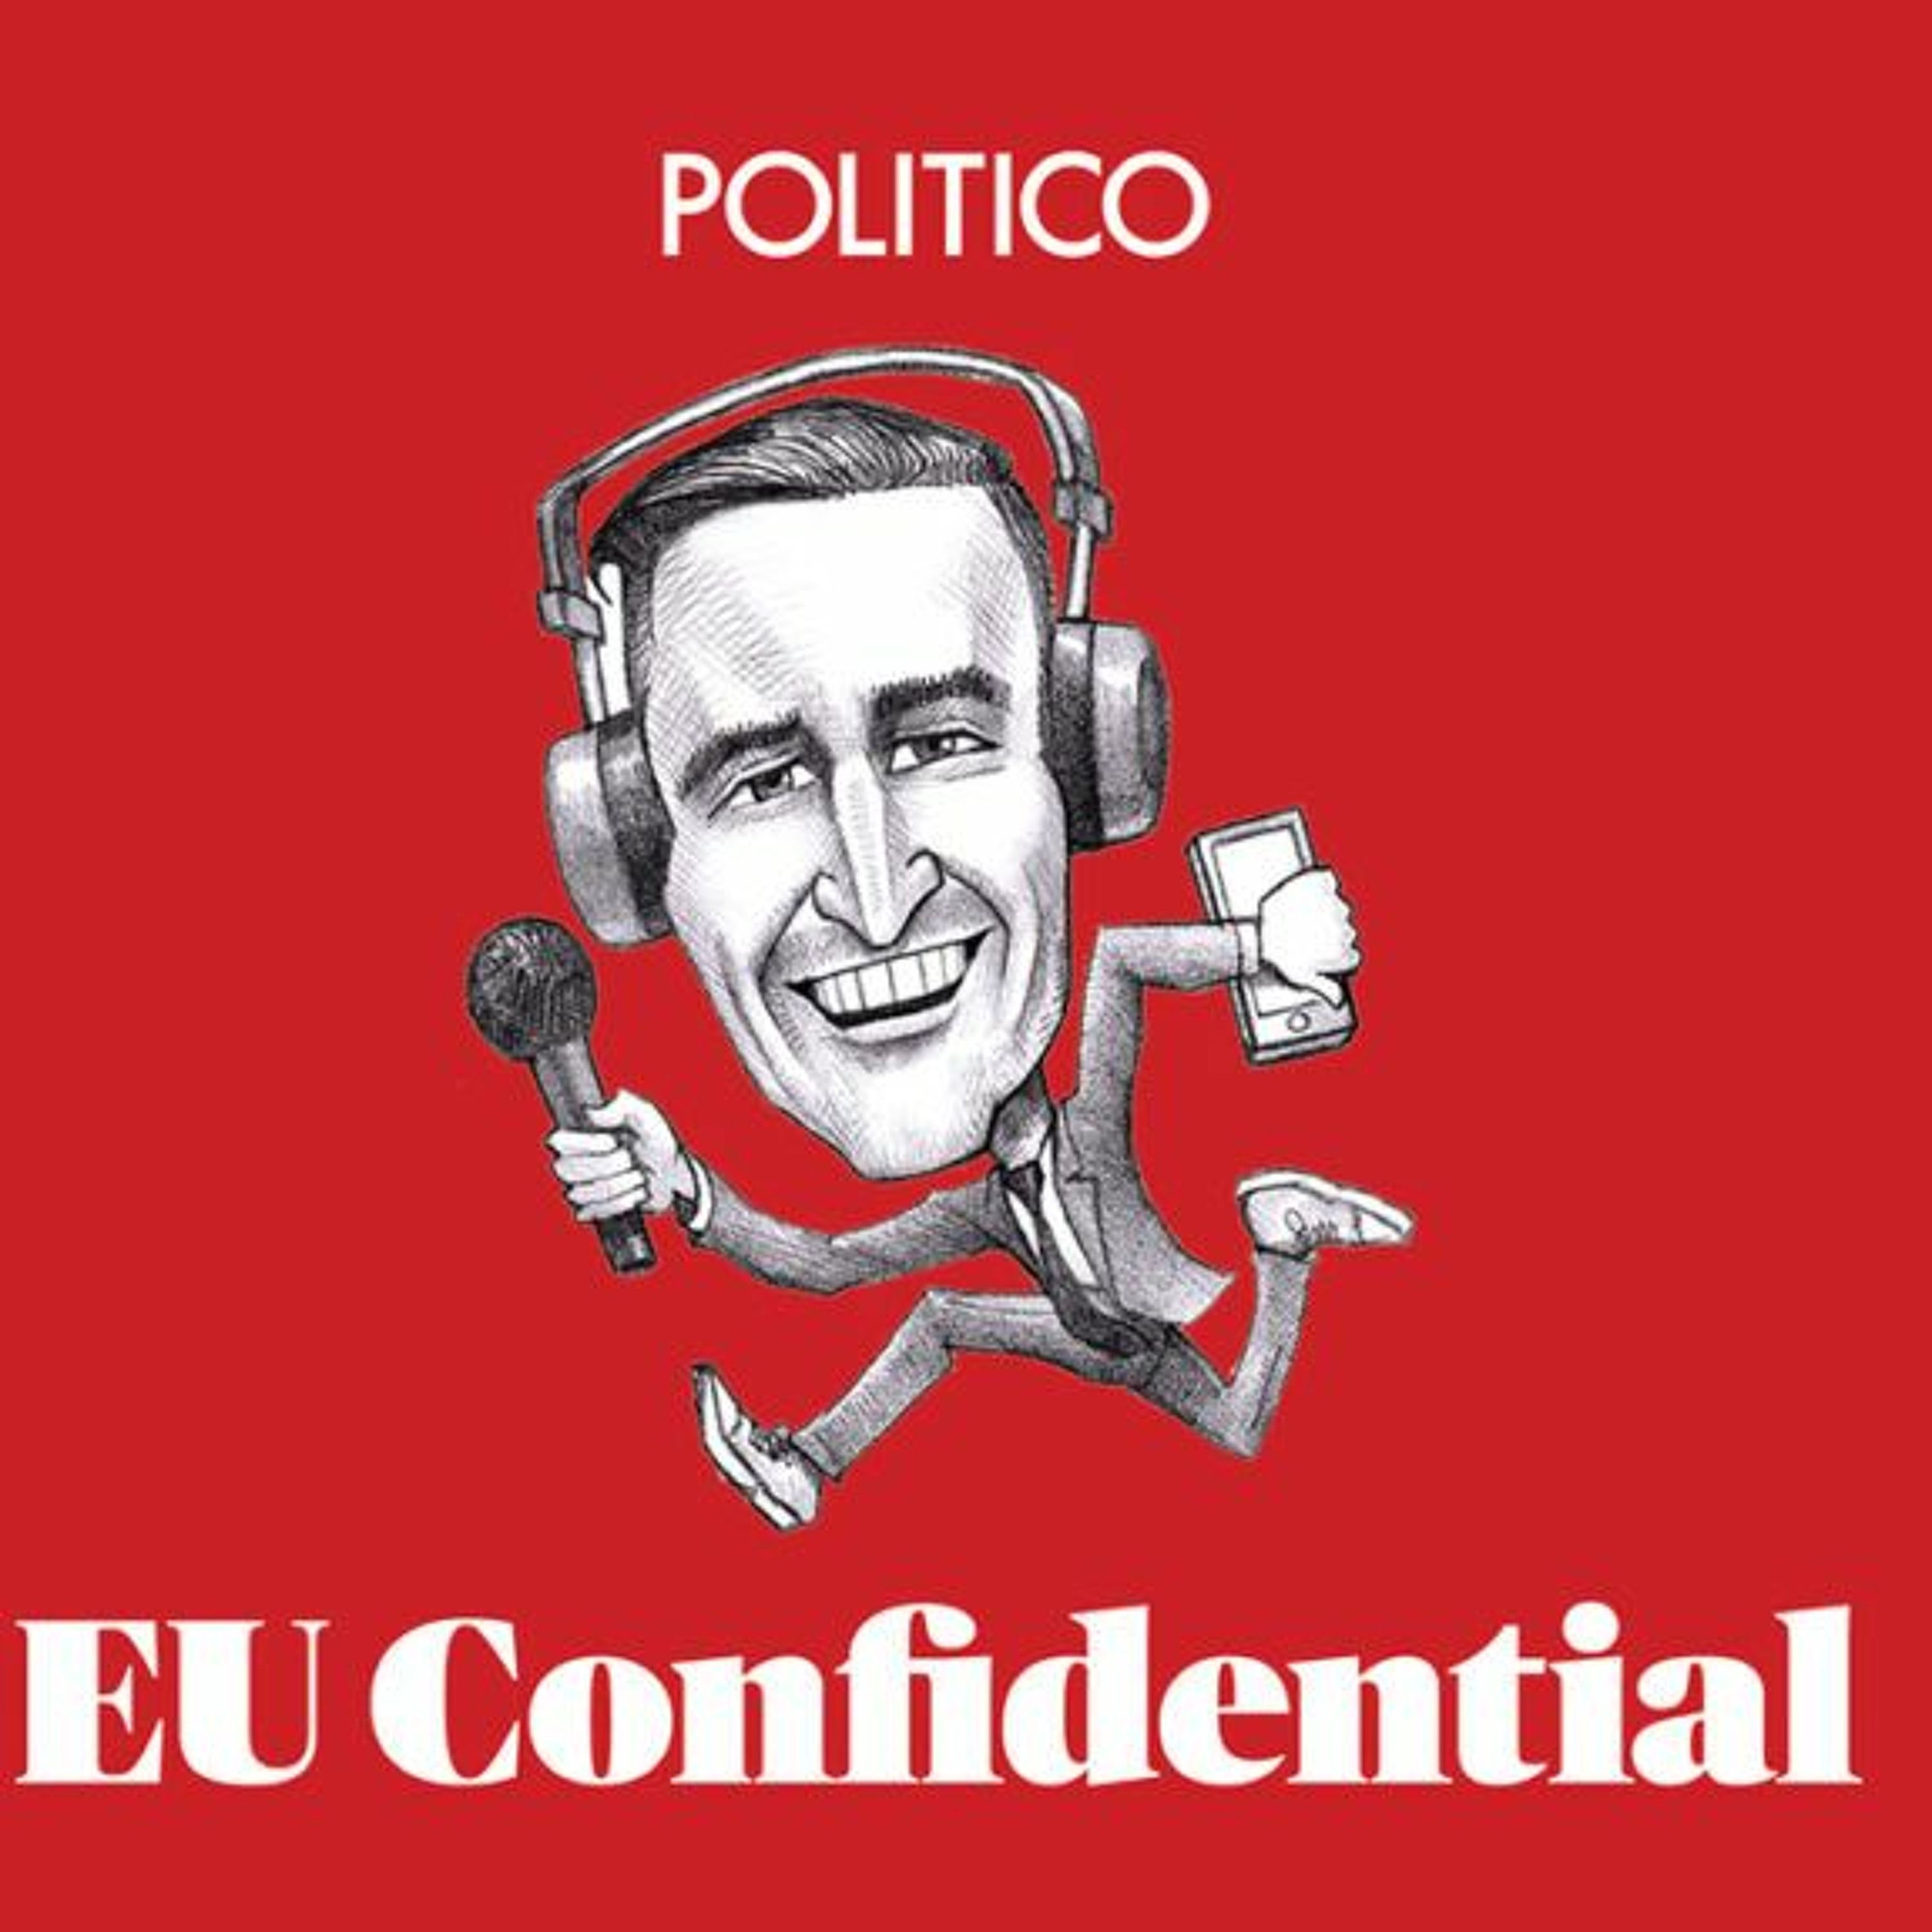 Episode 68, presented by UNESDA: Manfred Weber wants to recast the European Commission presidency